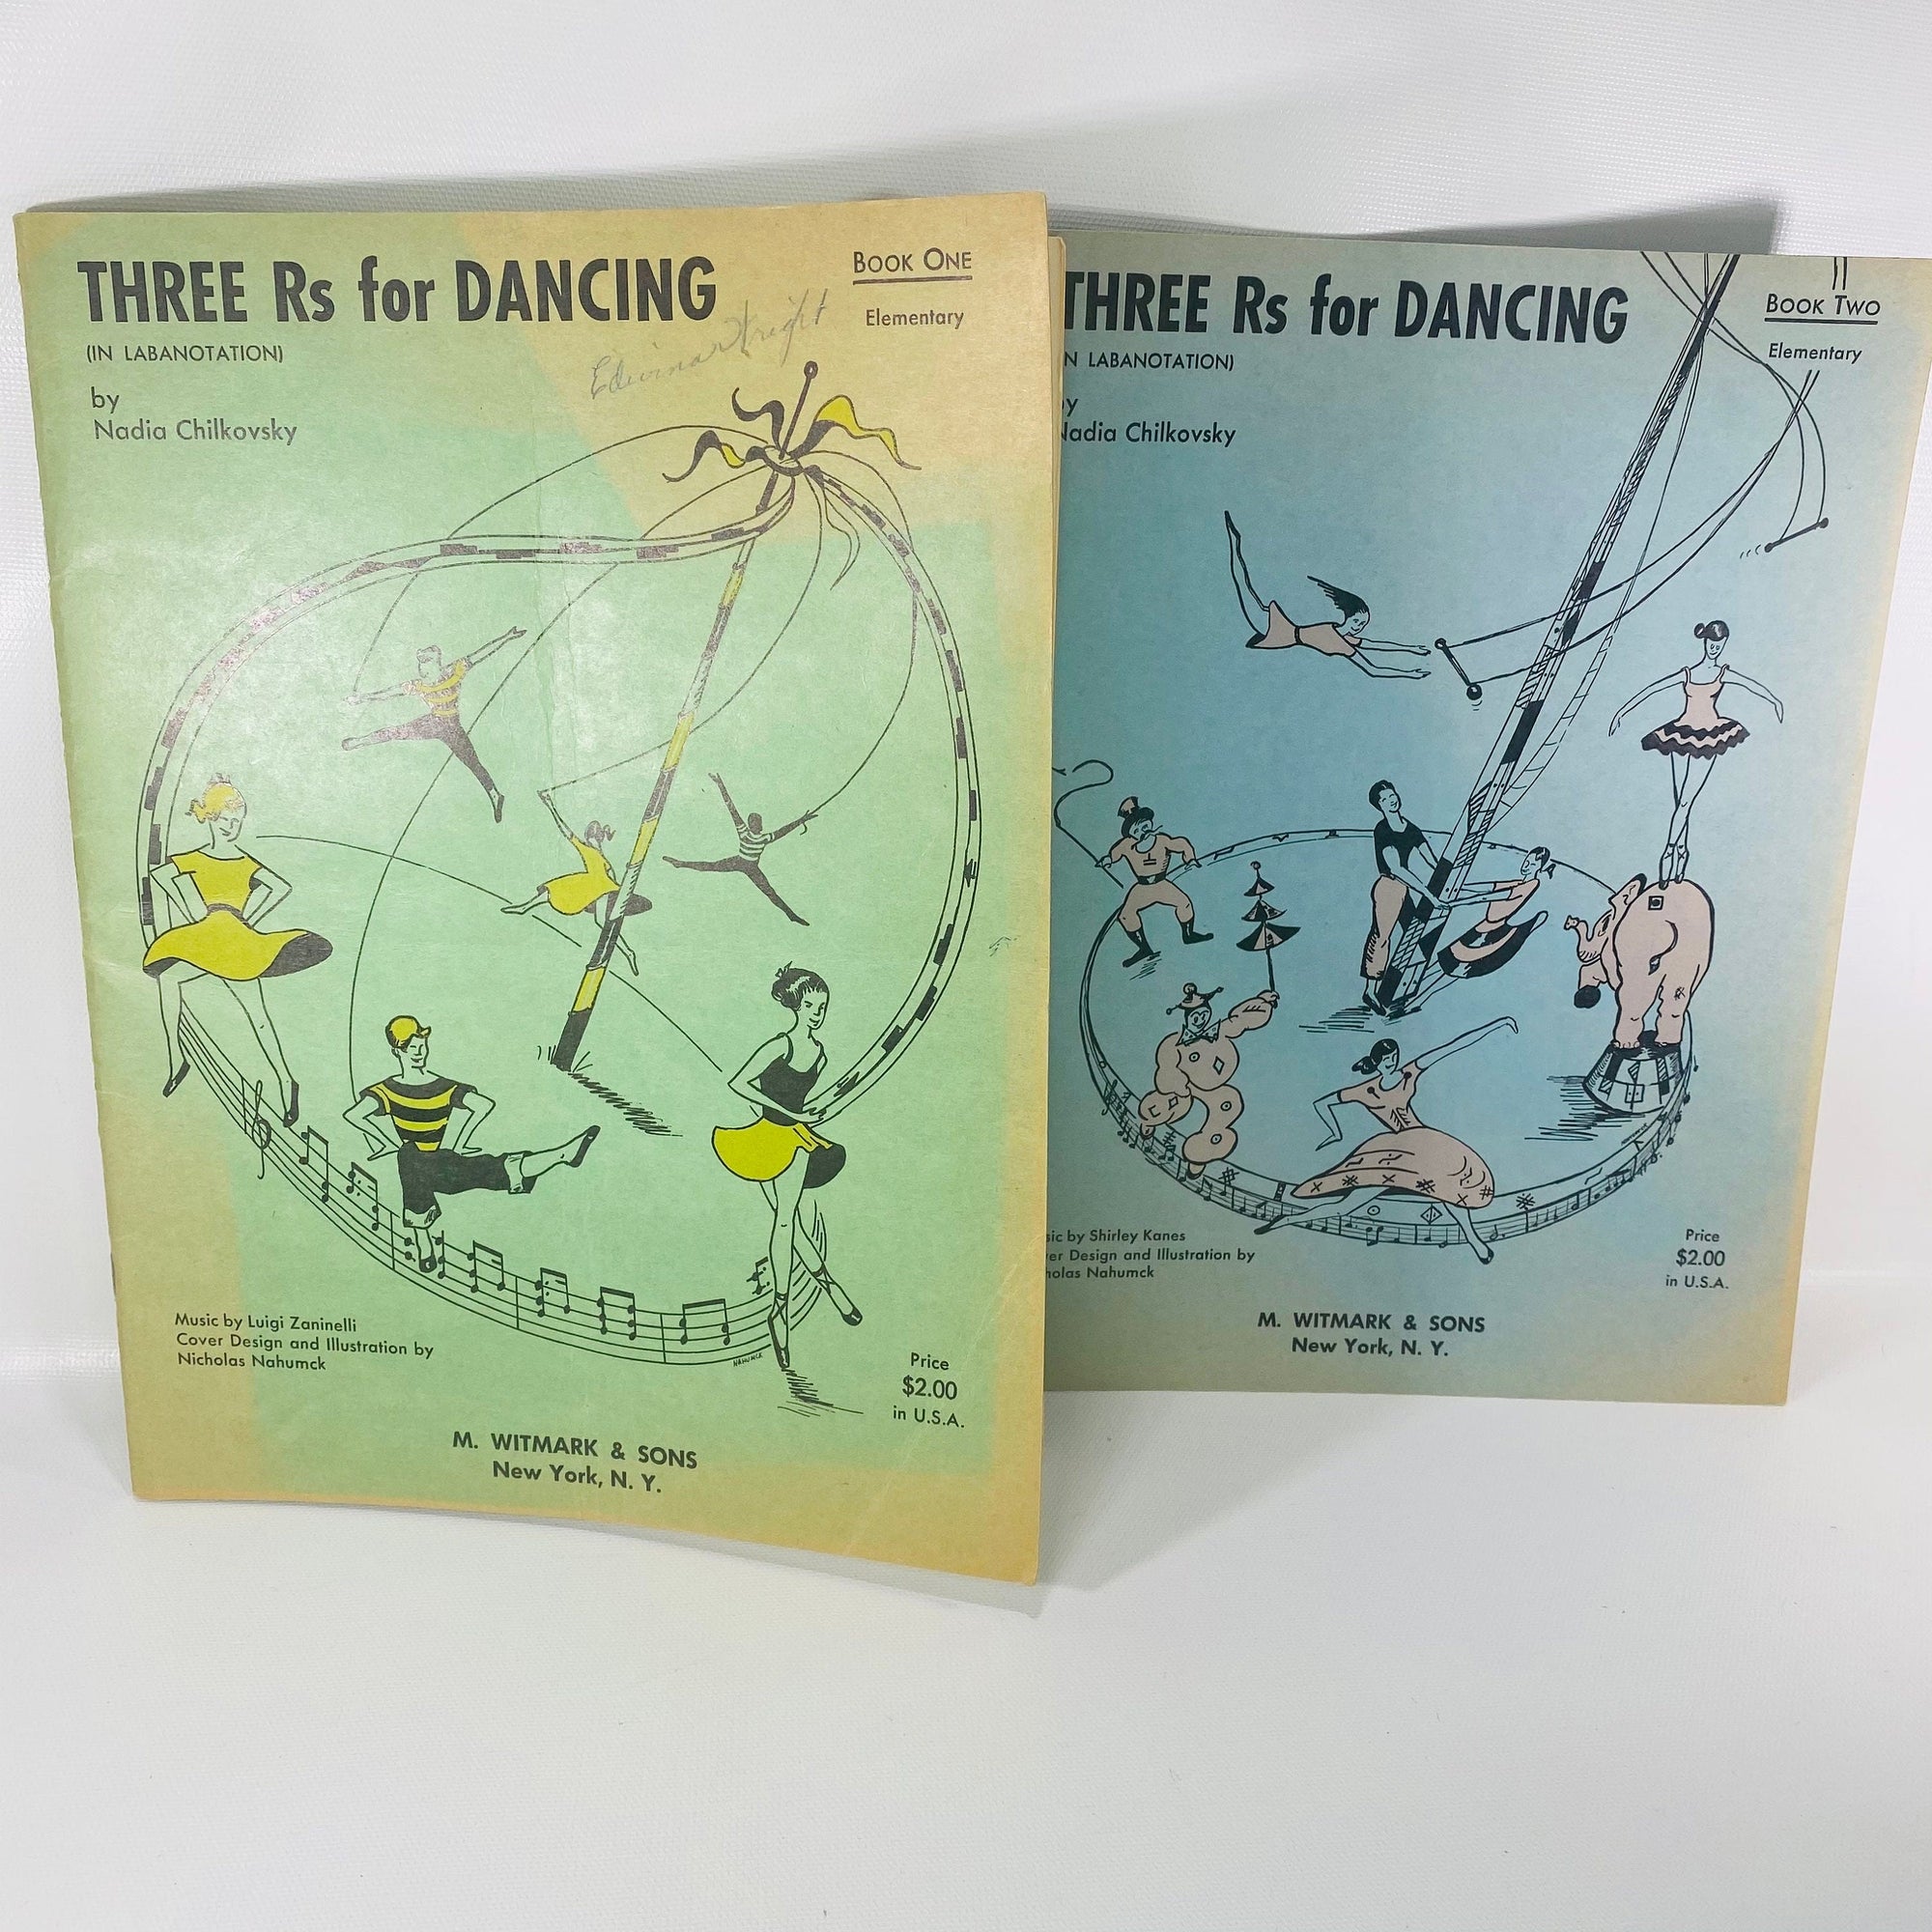 The Three R's for Dancing (in labanotation) Book One & Two by Nadia Chilkovsky 1953 Vintage Book